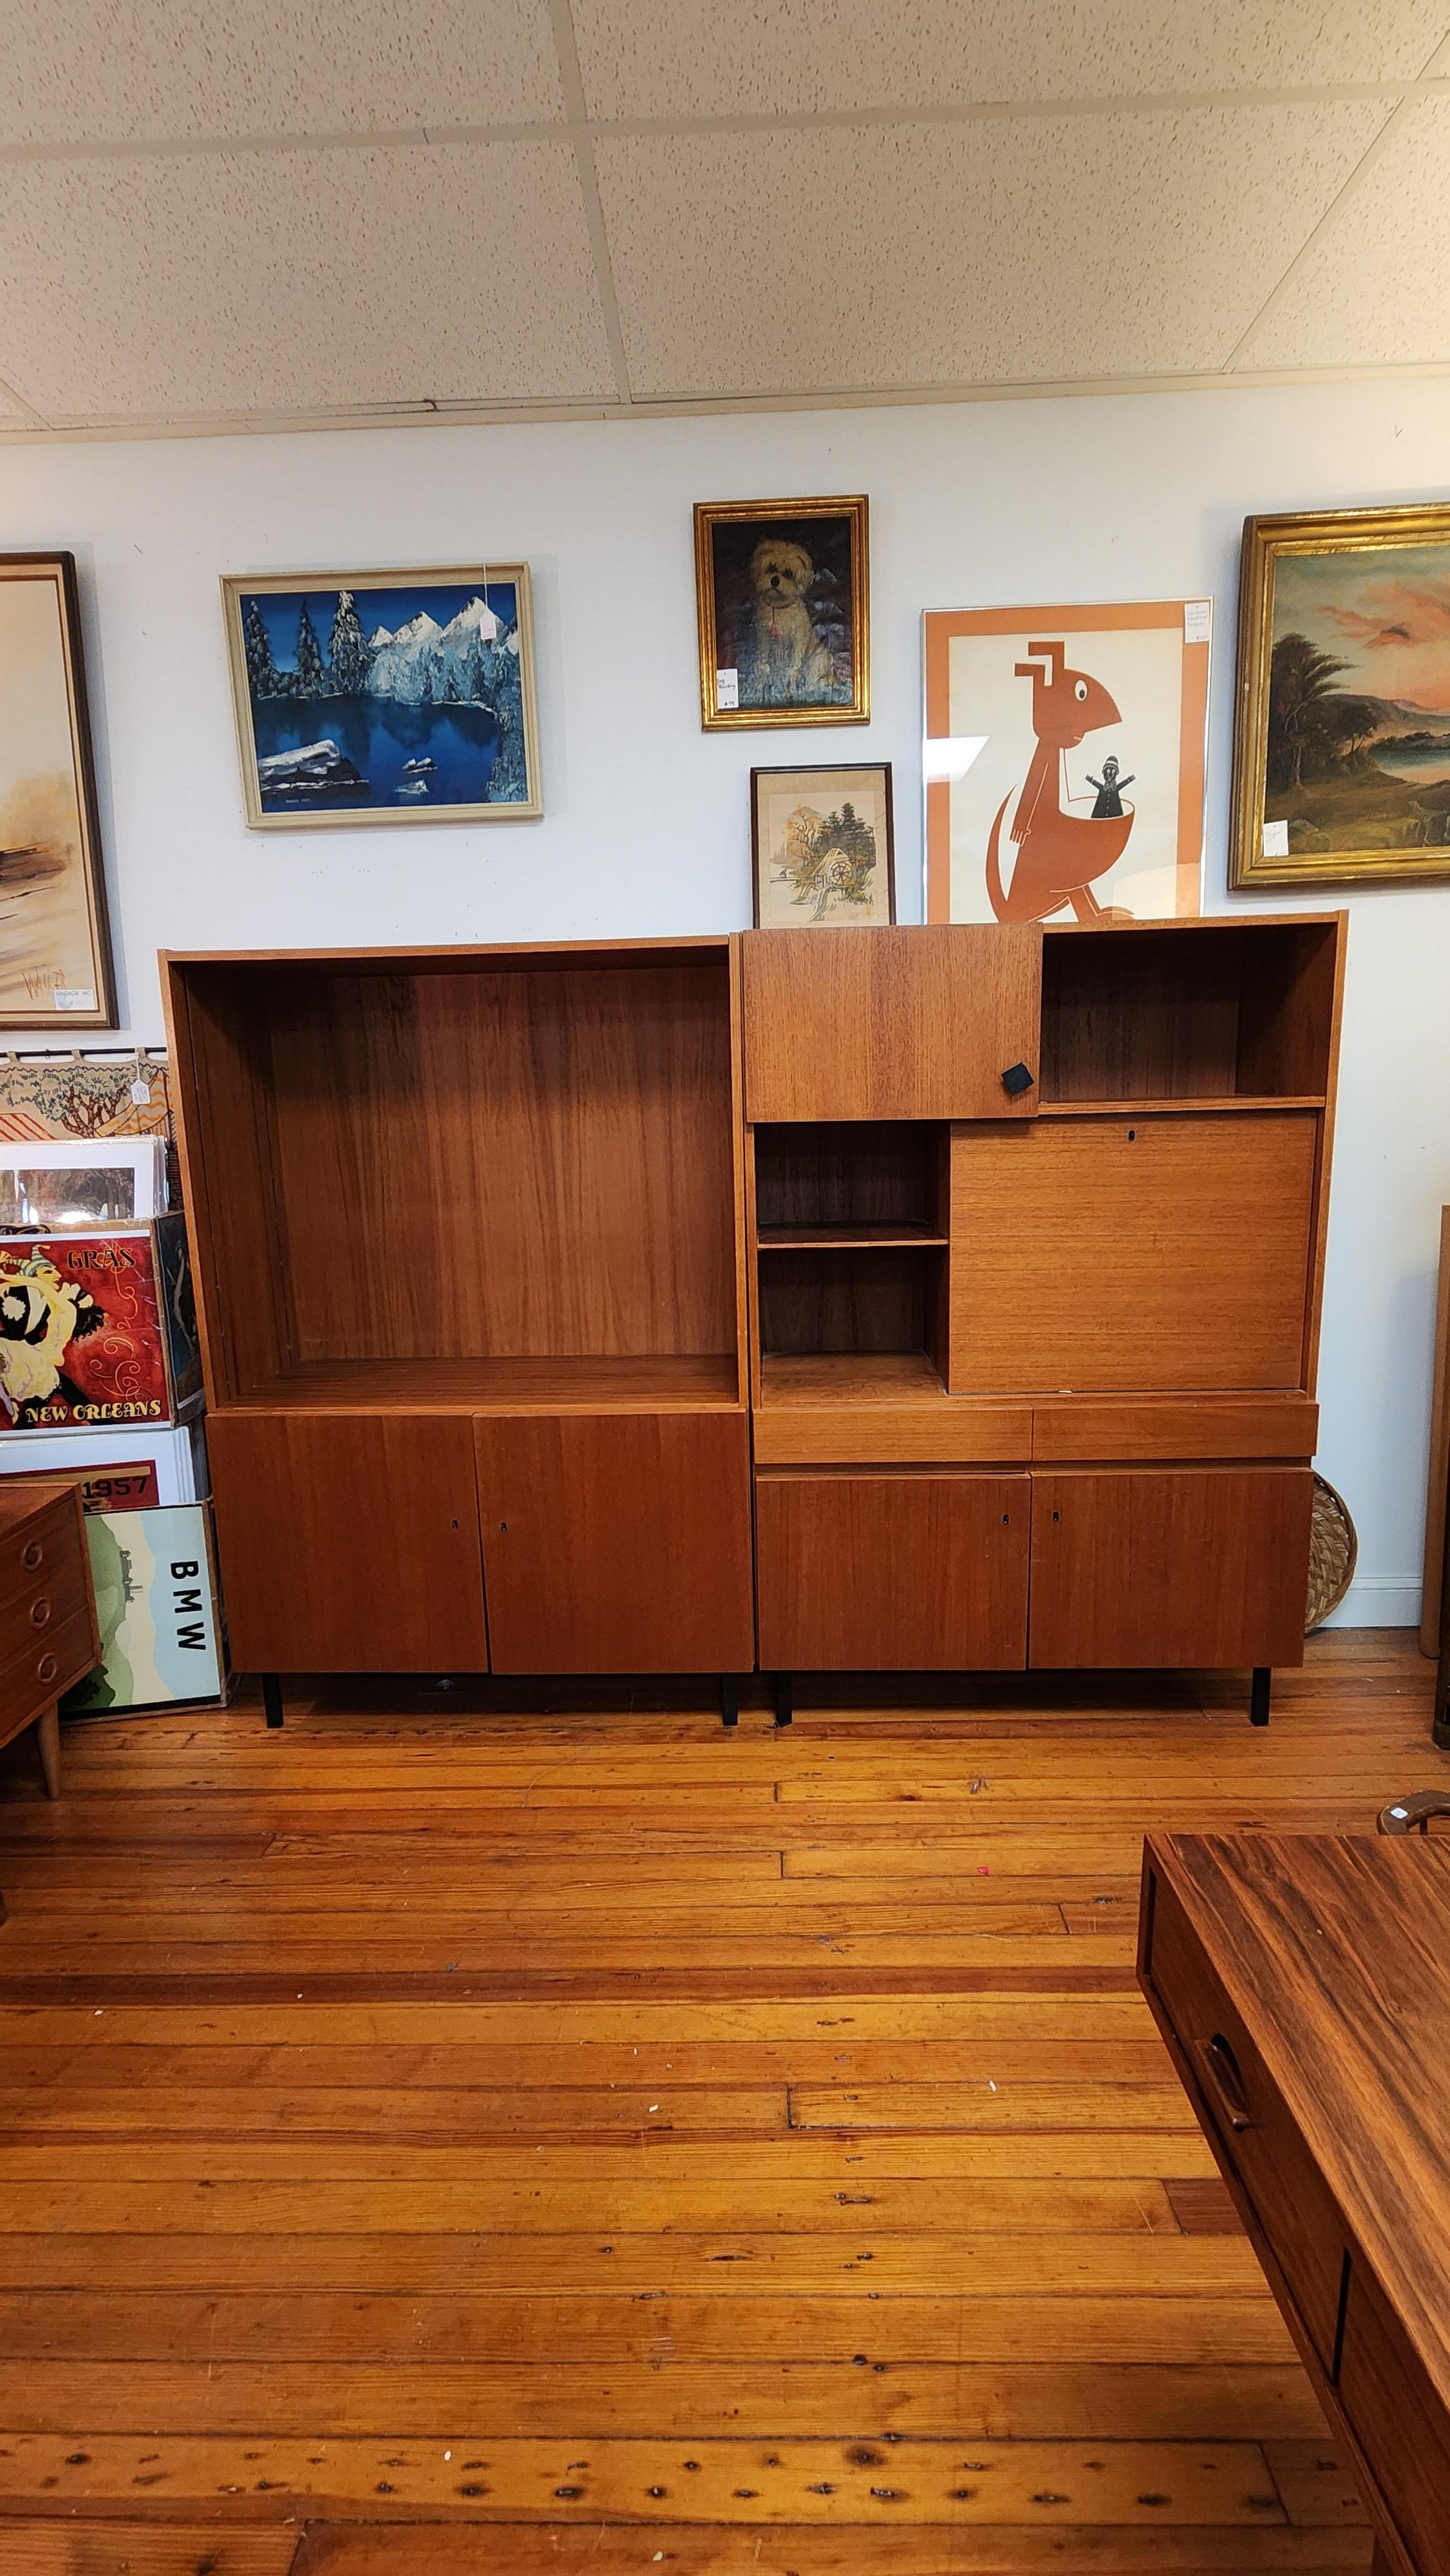 This pair of teak office pieces include a Bookshelf with lower cabinet and the second unit has storage area plus a tilt-down desk which would also work well as a bar. 
This set was purchased from the original owner and is in good original condition.